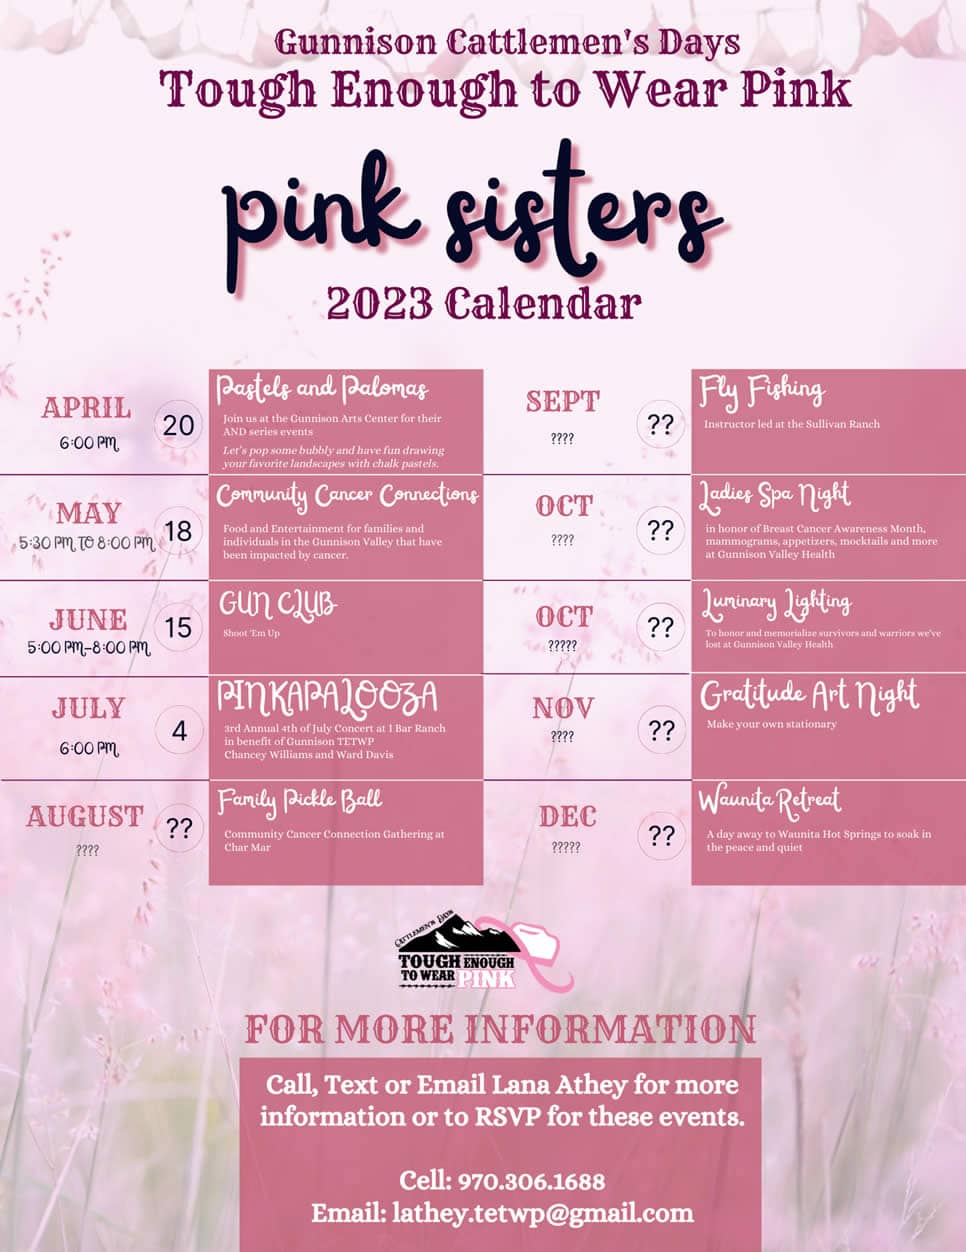 Pink Sisters 2023 Events